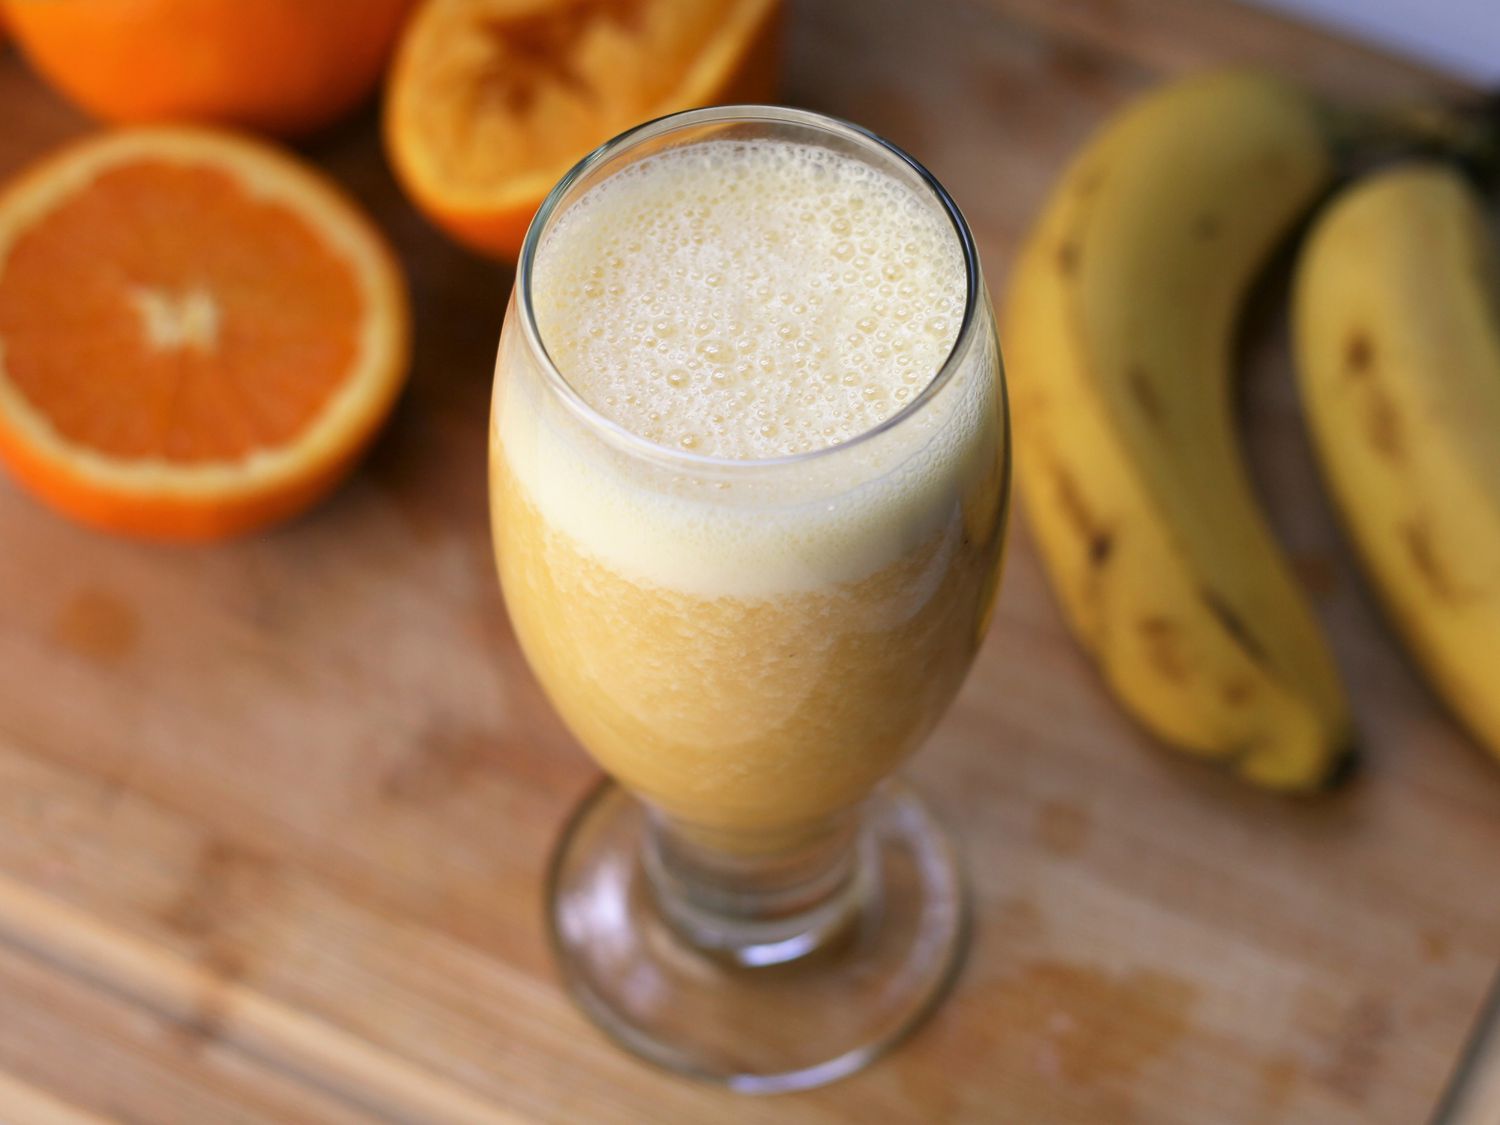 Juice with foam top and oranges and bananas in background